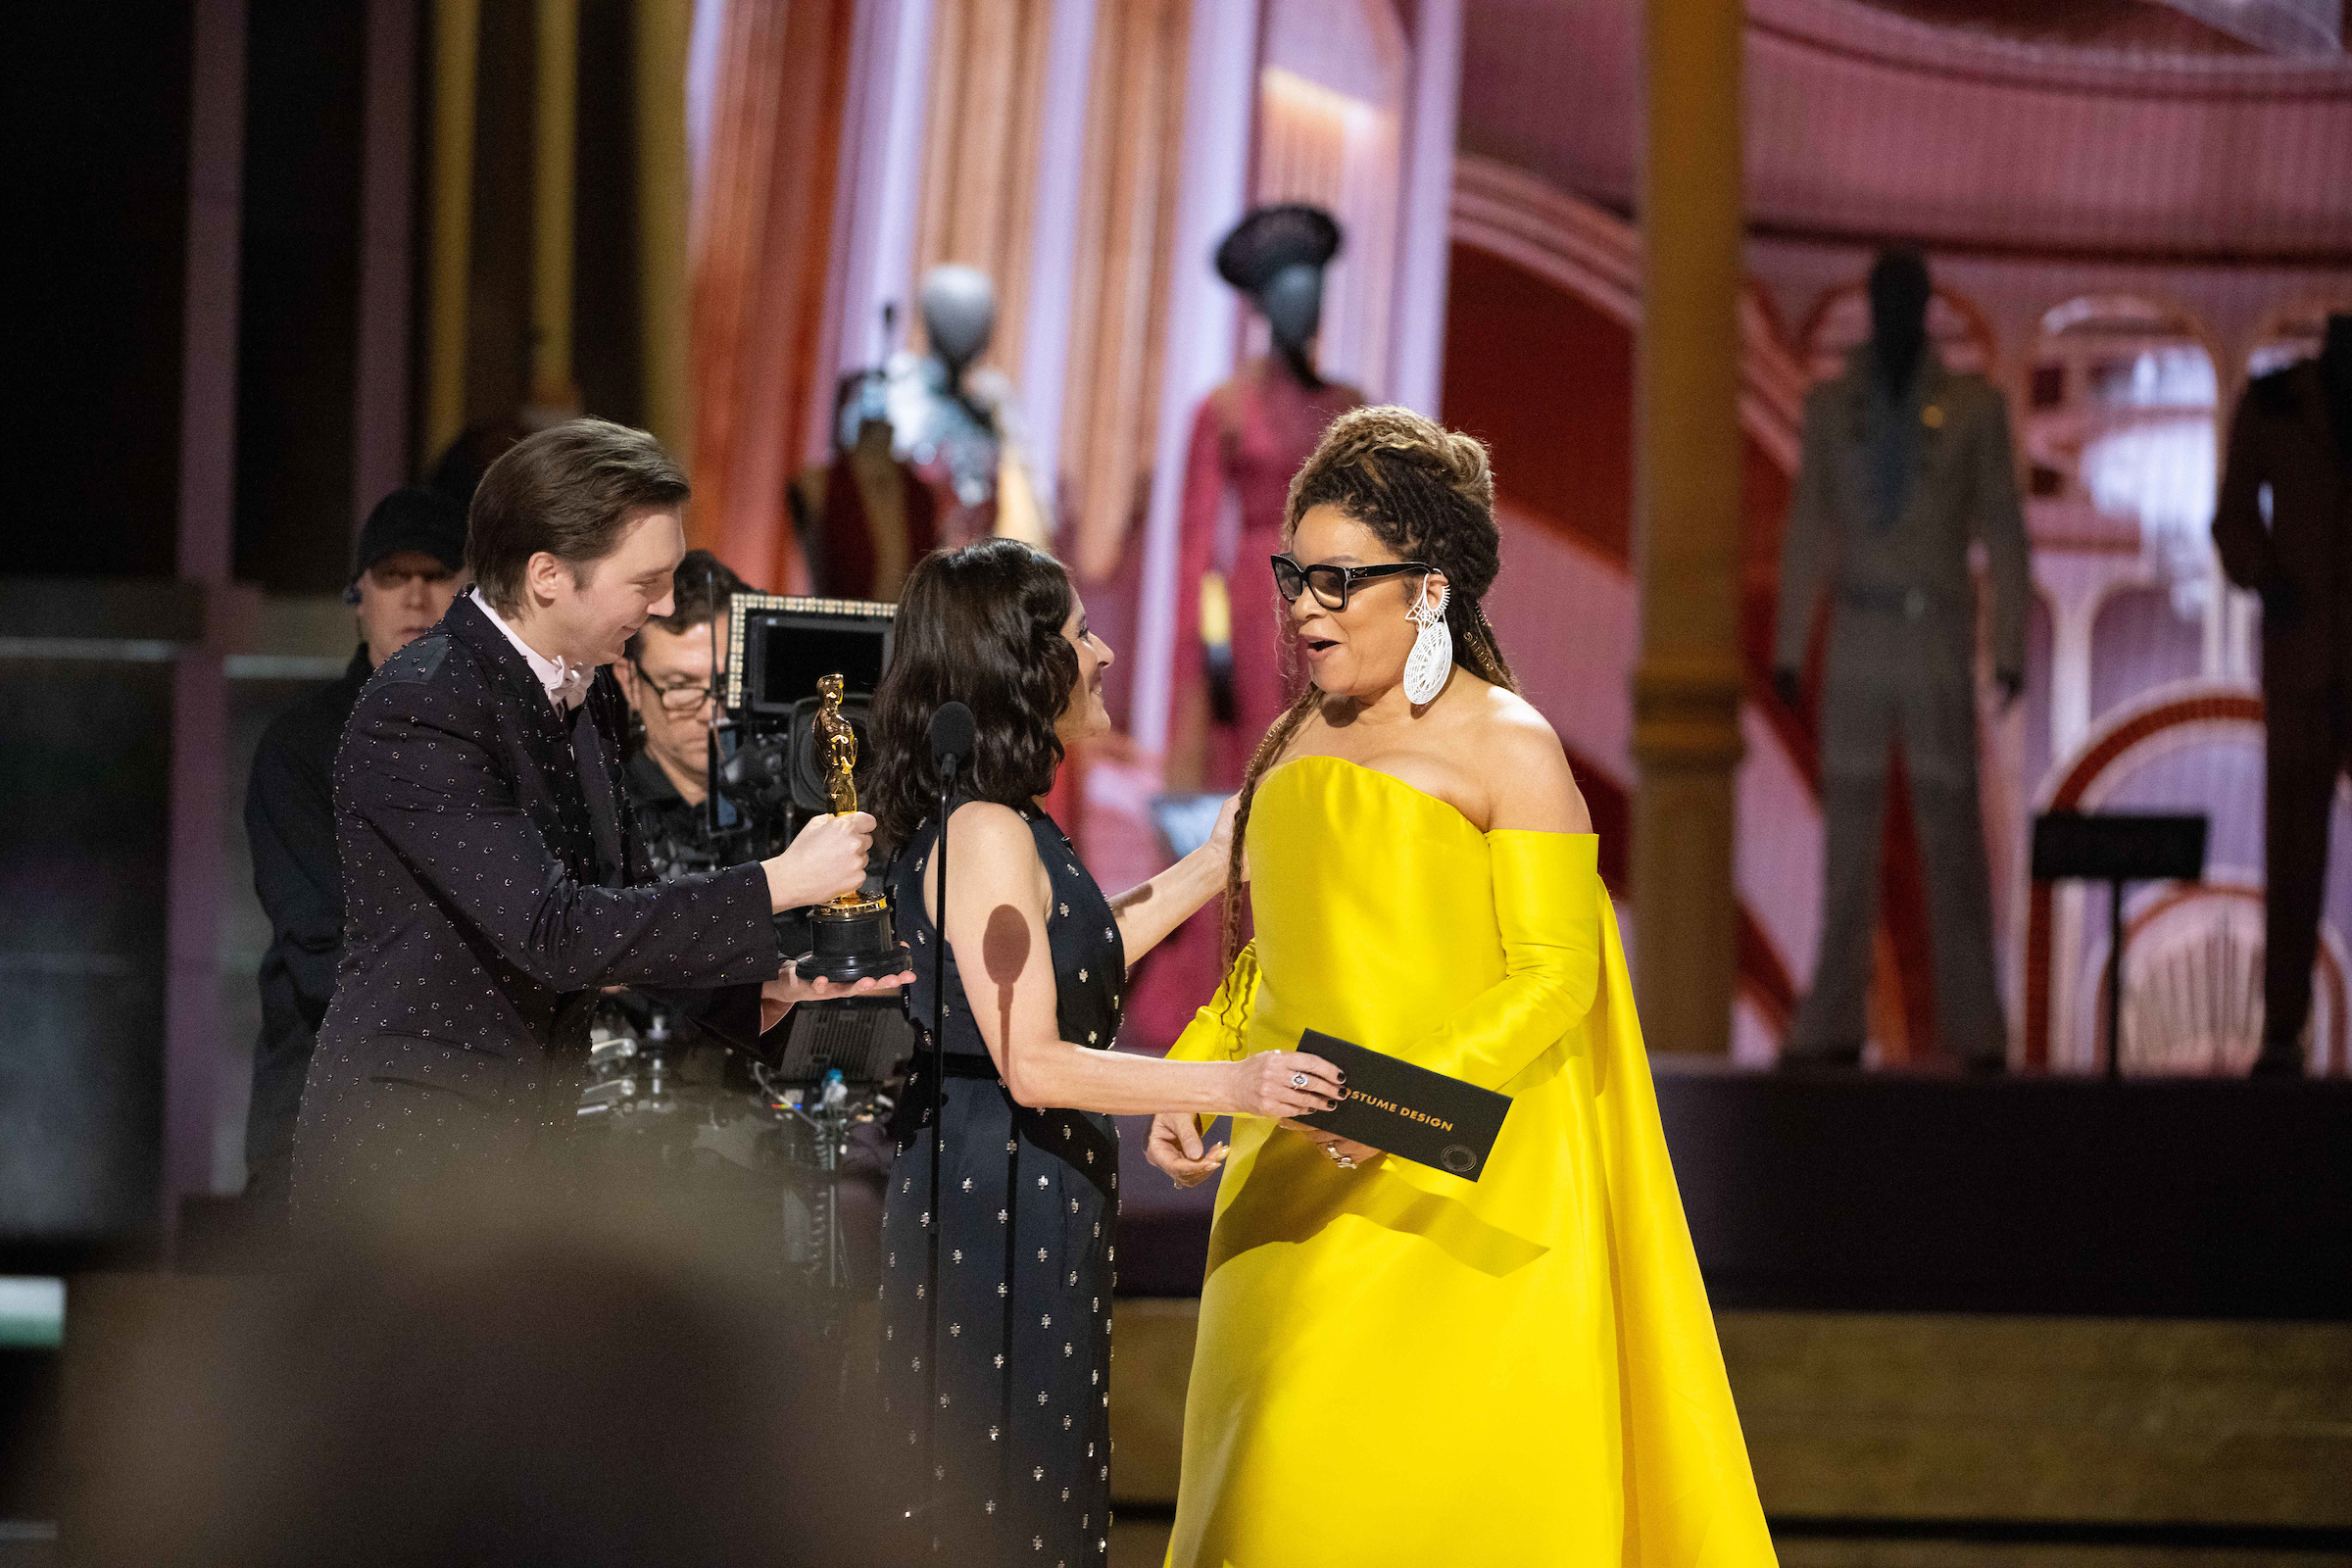 Paul Dano and Julia Louis-Dreyfus present the Oscar® for costume design to Ruth Carter during the live ABC telecast of the 95th Oscars at the Dolby® Theatre at Ovation Hollywood on Sunday, March 12, 2023. Photo credit: Blaine Ohigashi / ©A.M.P.A.S.